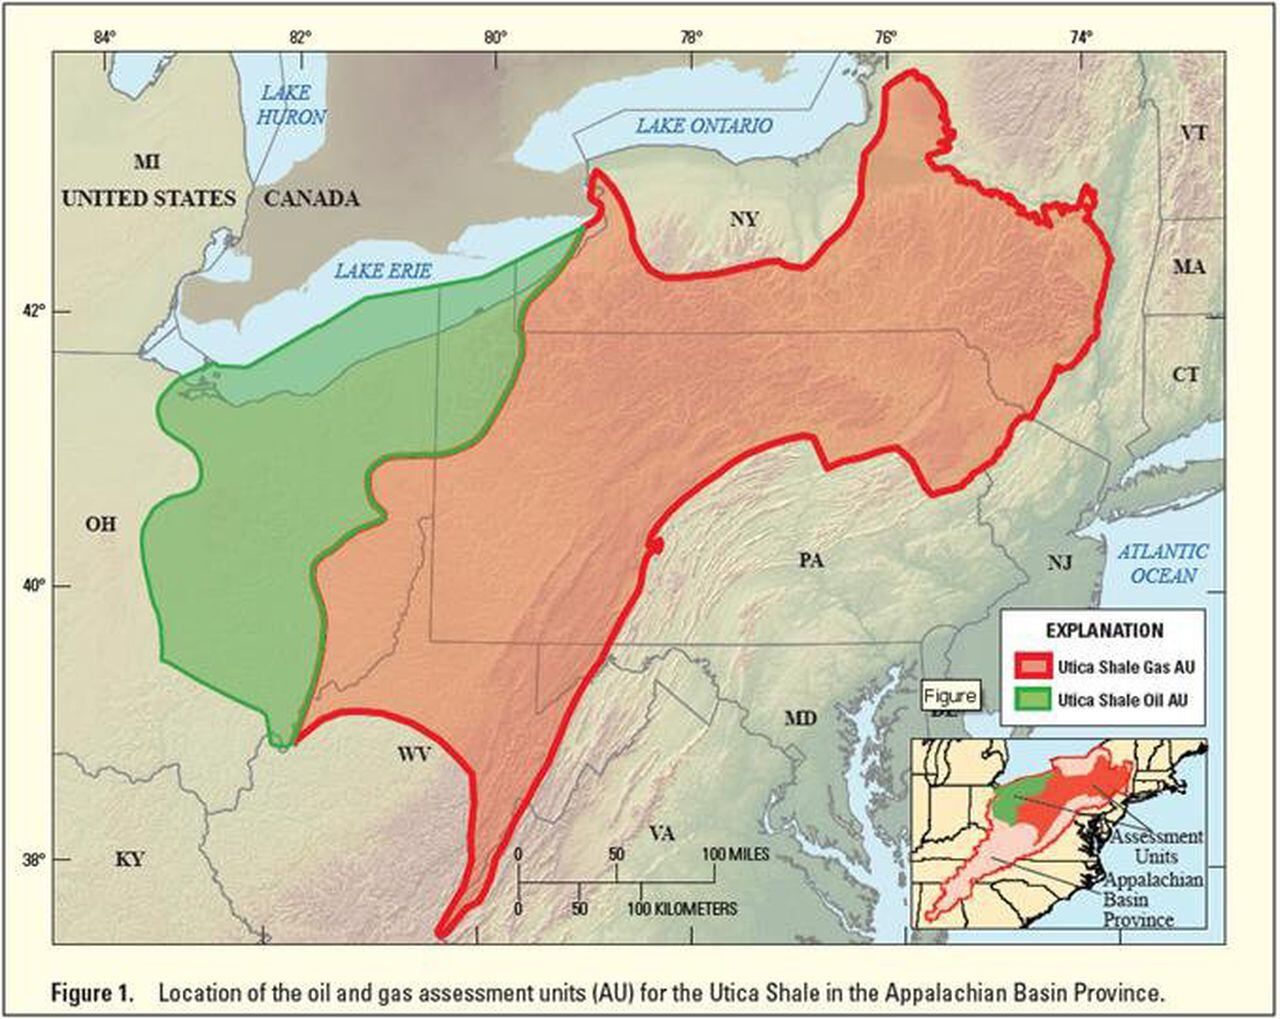   
																Utica shale, below the Marcellus, contains large gas, oil reserves, study shows 
															 